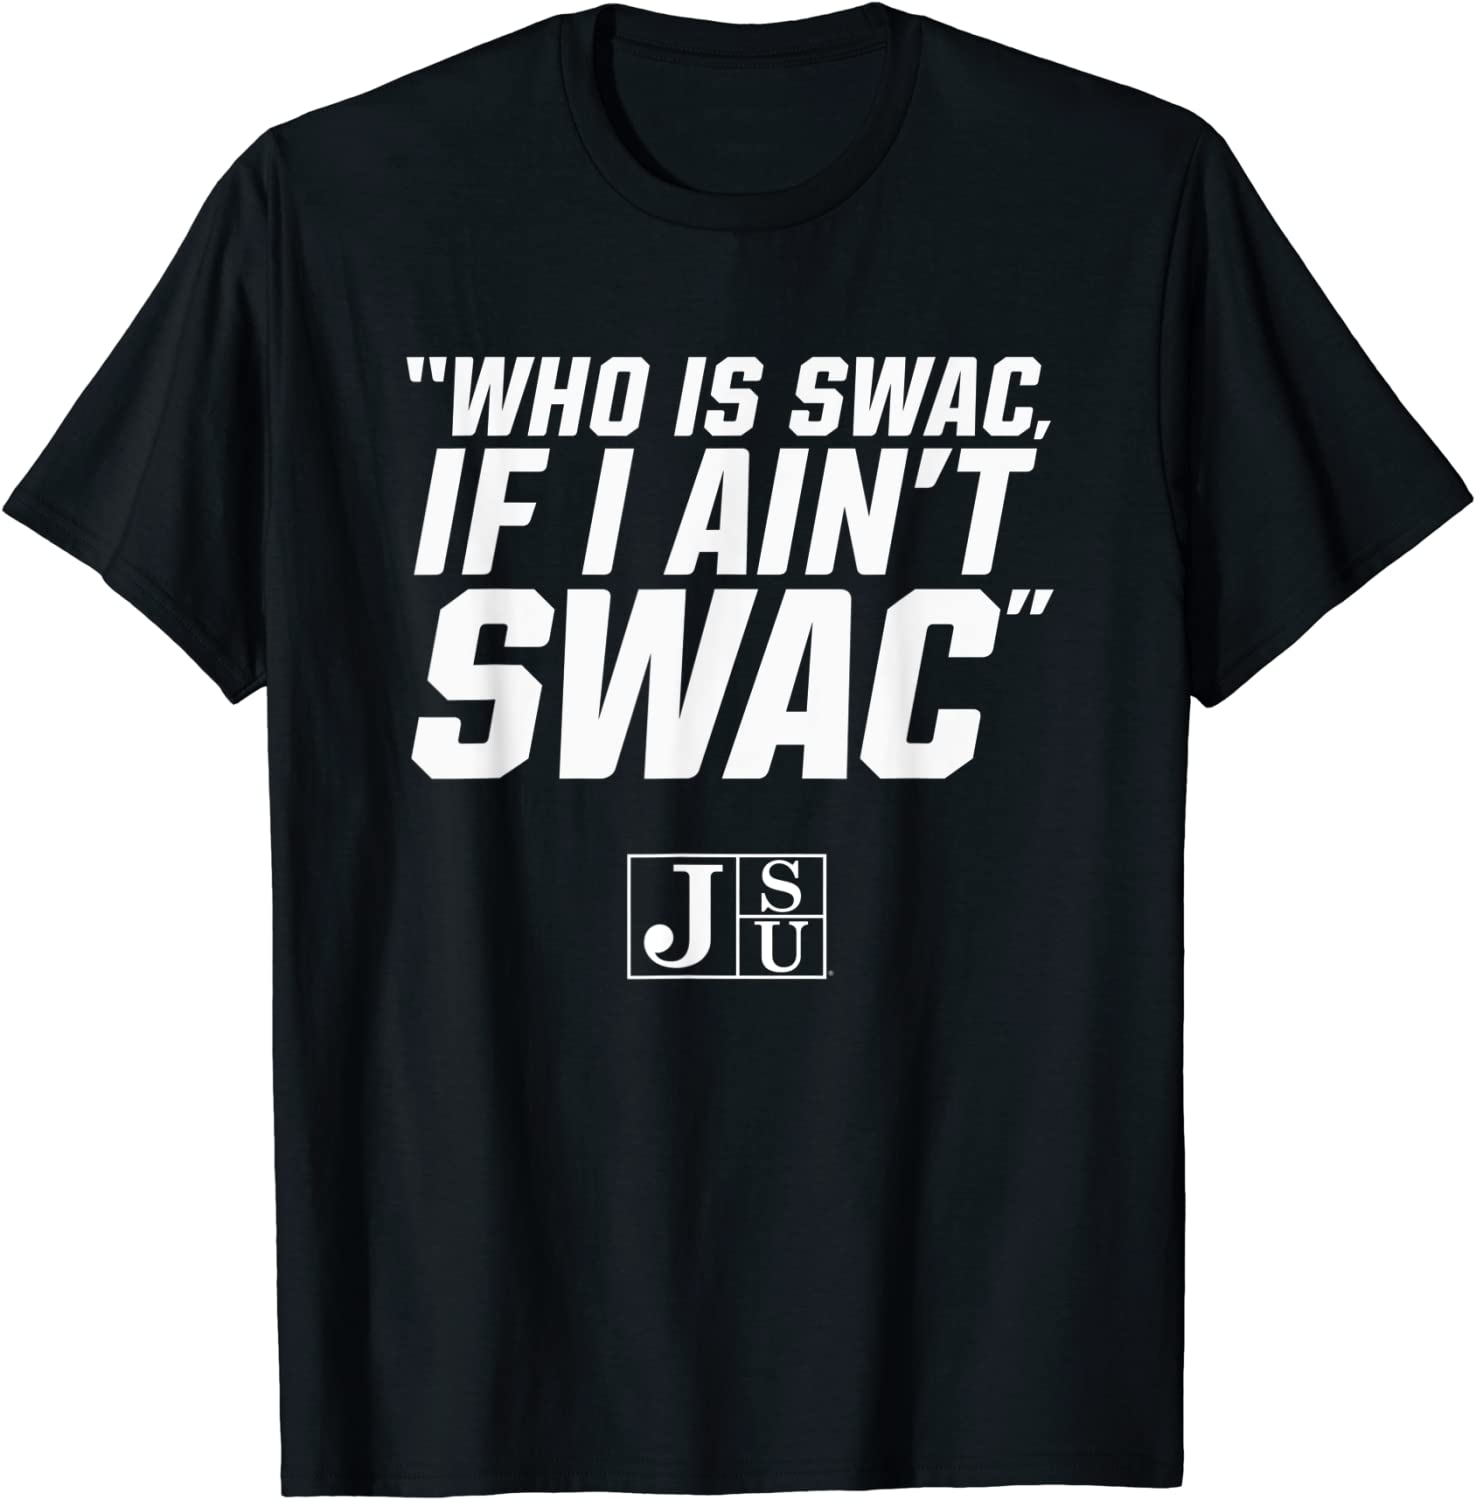 Jackson State Football If I Ain't SWAC Officially Licensed Tee Shirt